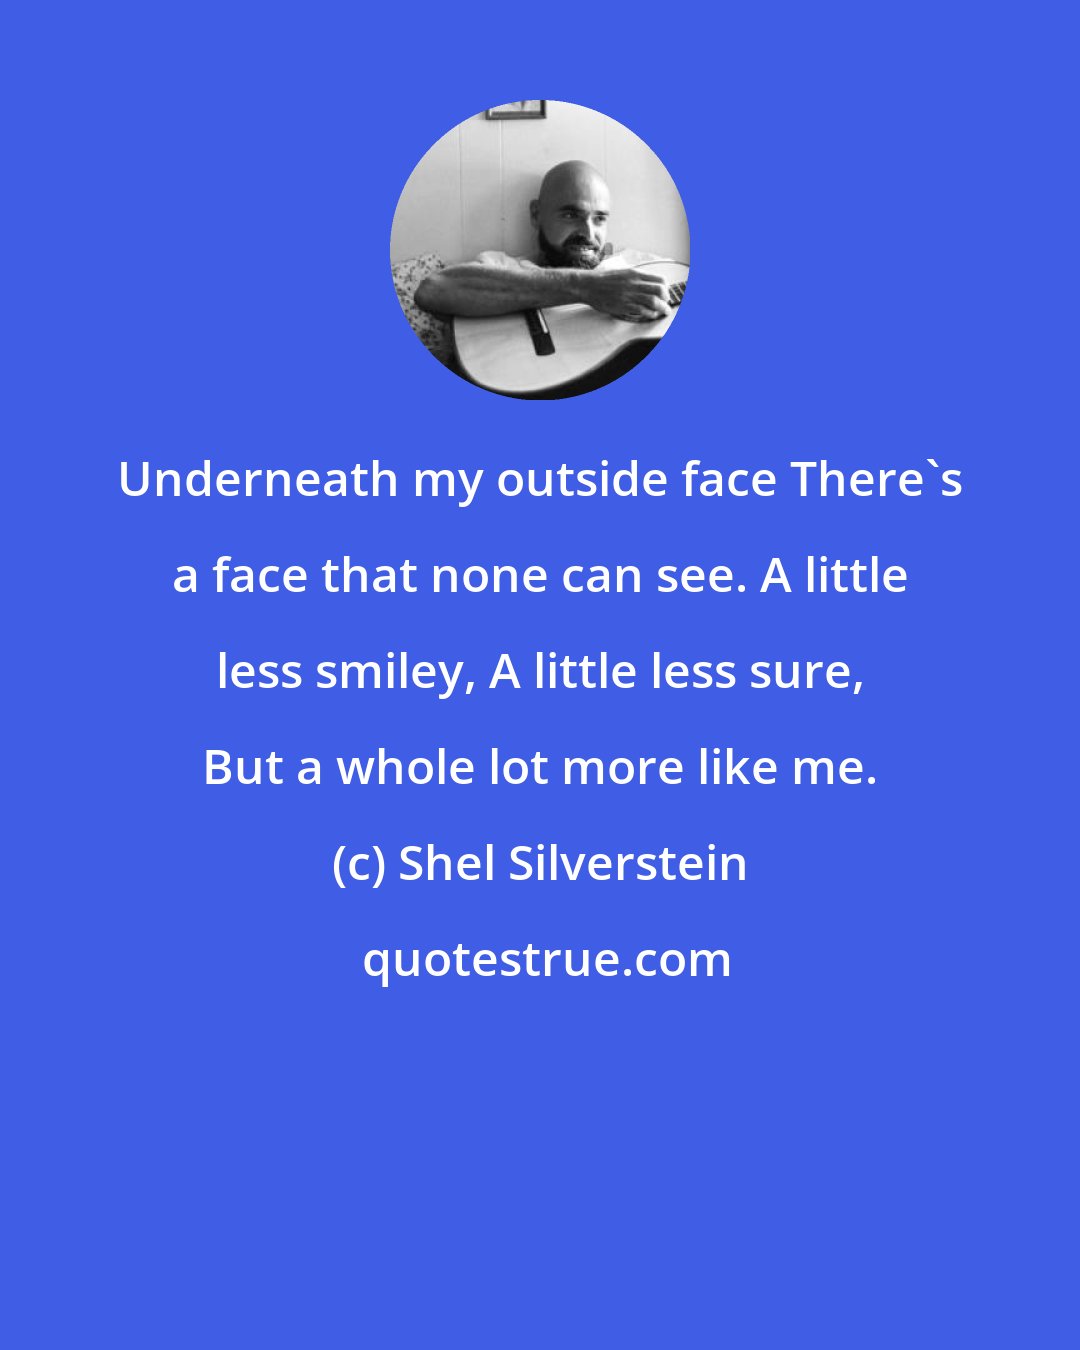 Shel Silverstein: Underneath my outside face There's a face that none can see. A little less smiley, A little less sure, But a whole lot more like me.